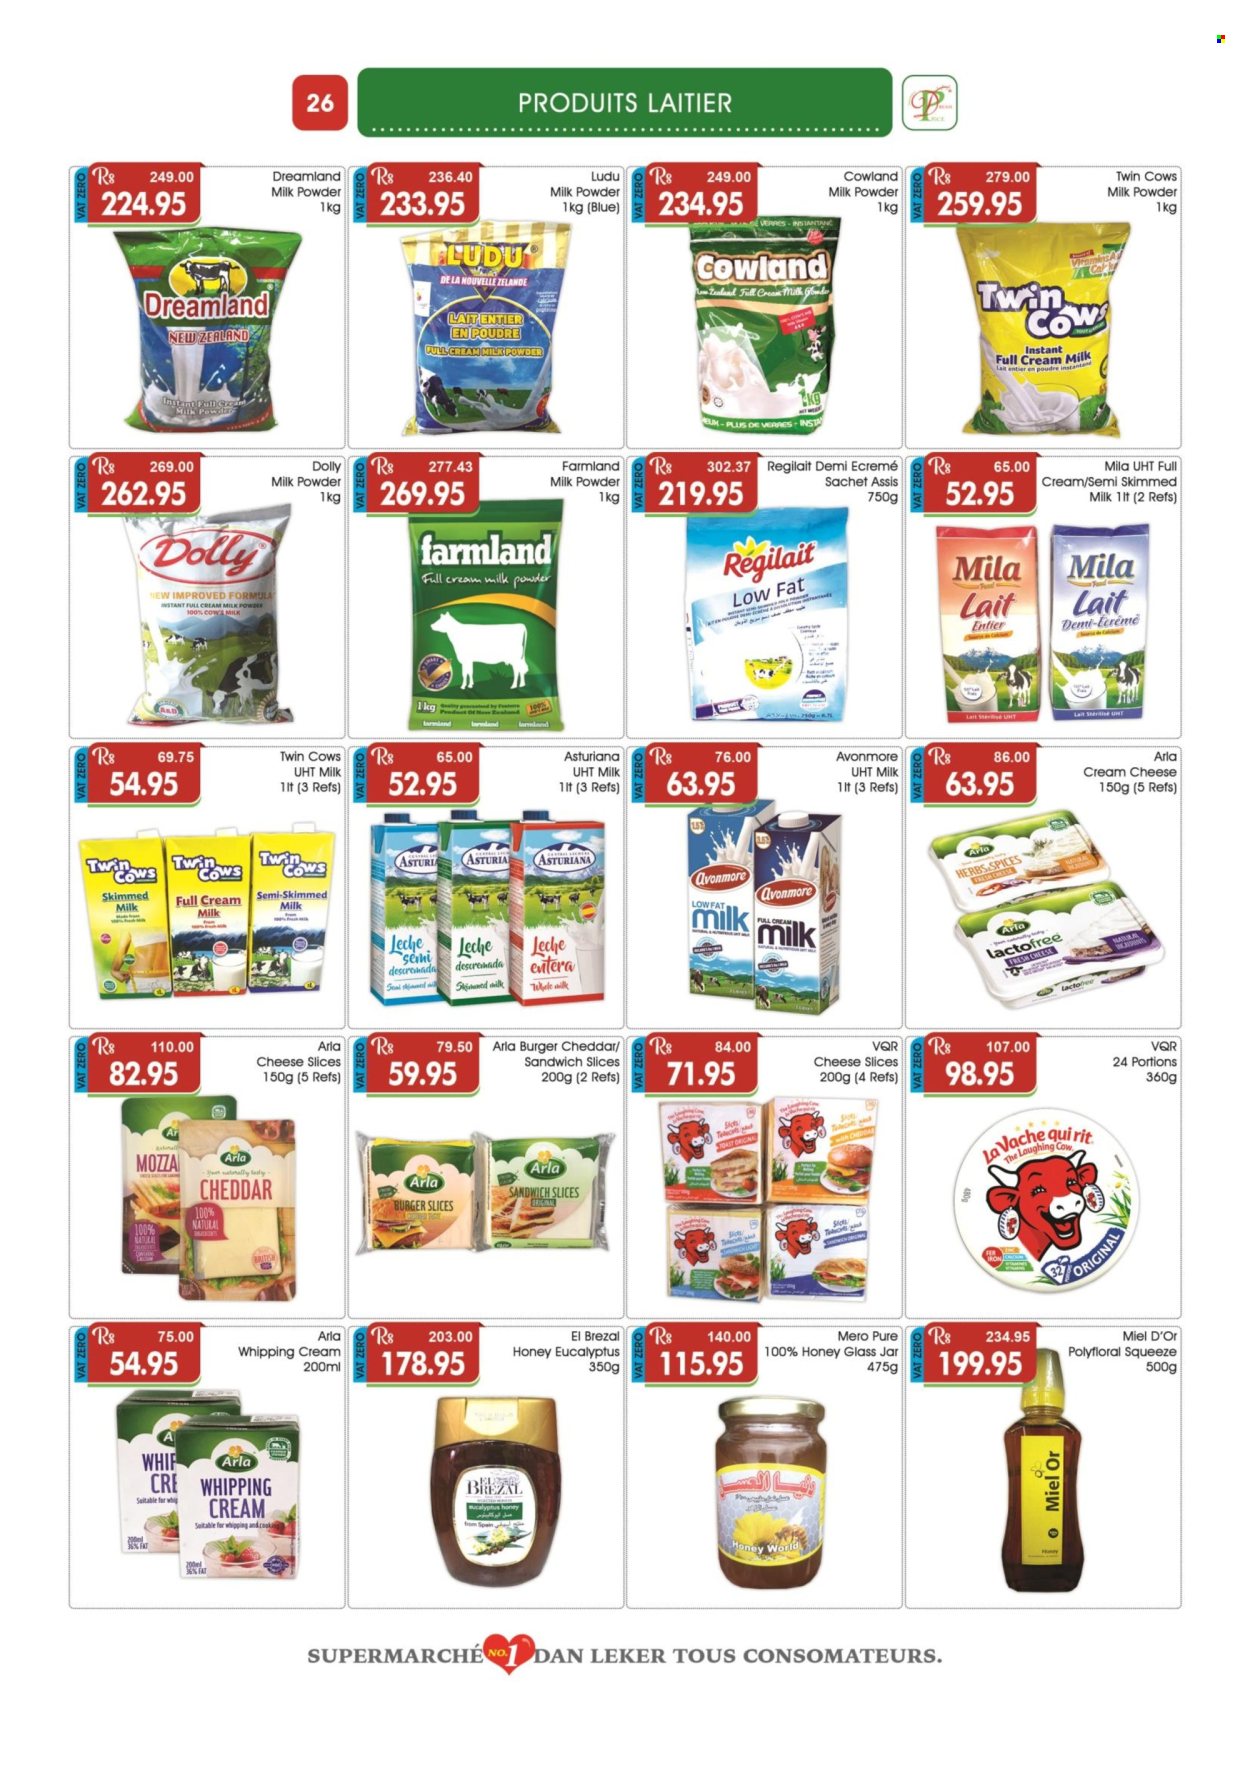 thumbnail - Dreamprice Catalogue - 15.10.2022 - 13.11.2022 - Sales products - sandwich, cream cheese, sandwich slices, sliced cheese, cheddar, cheese, The Laughing Cow, Arla, milk powder, whipping cream, herbs, honey, jar. Page 26.